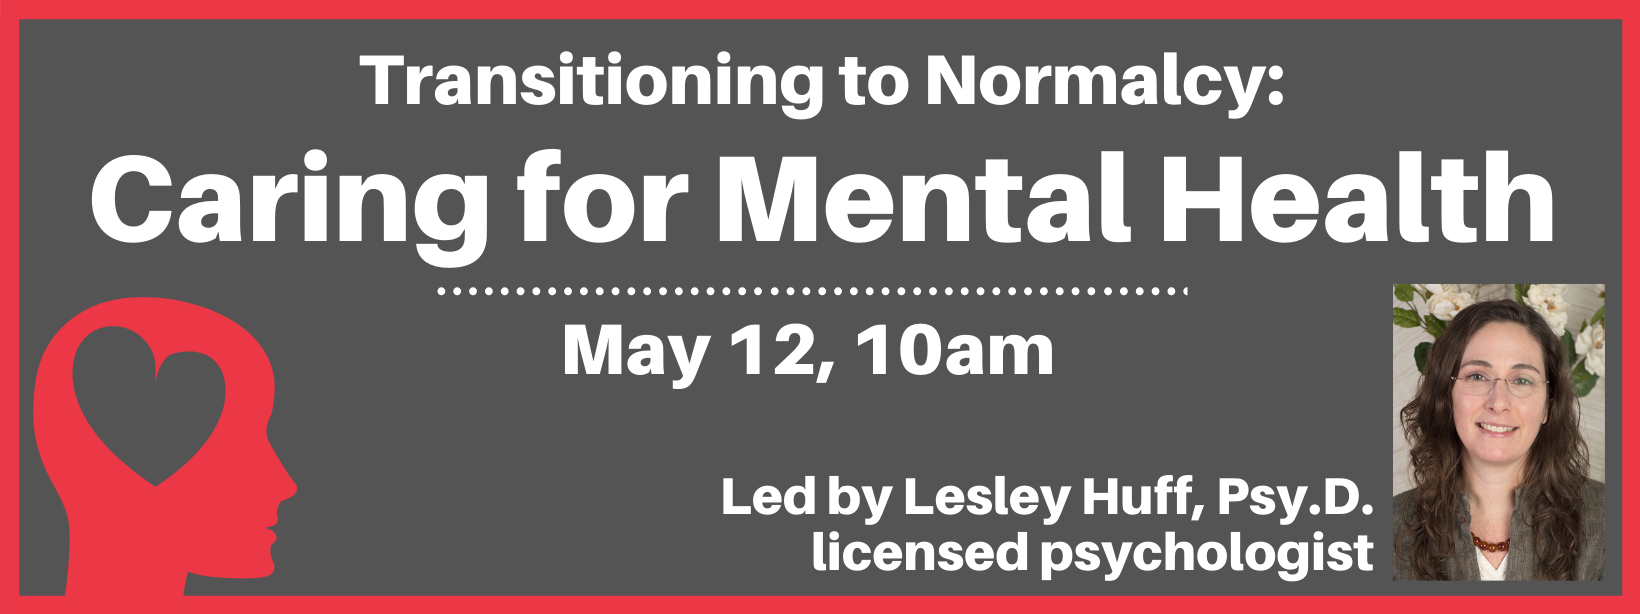 Transitioning to Normalcy: Caring for Mental Health